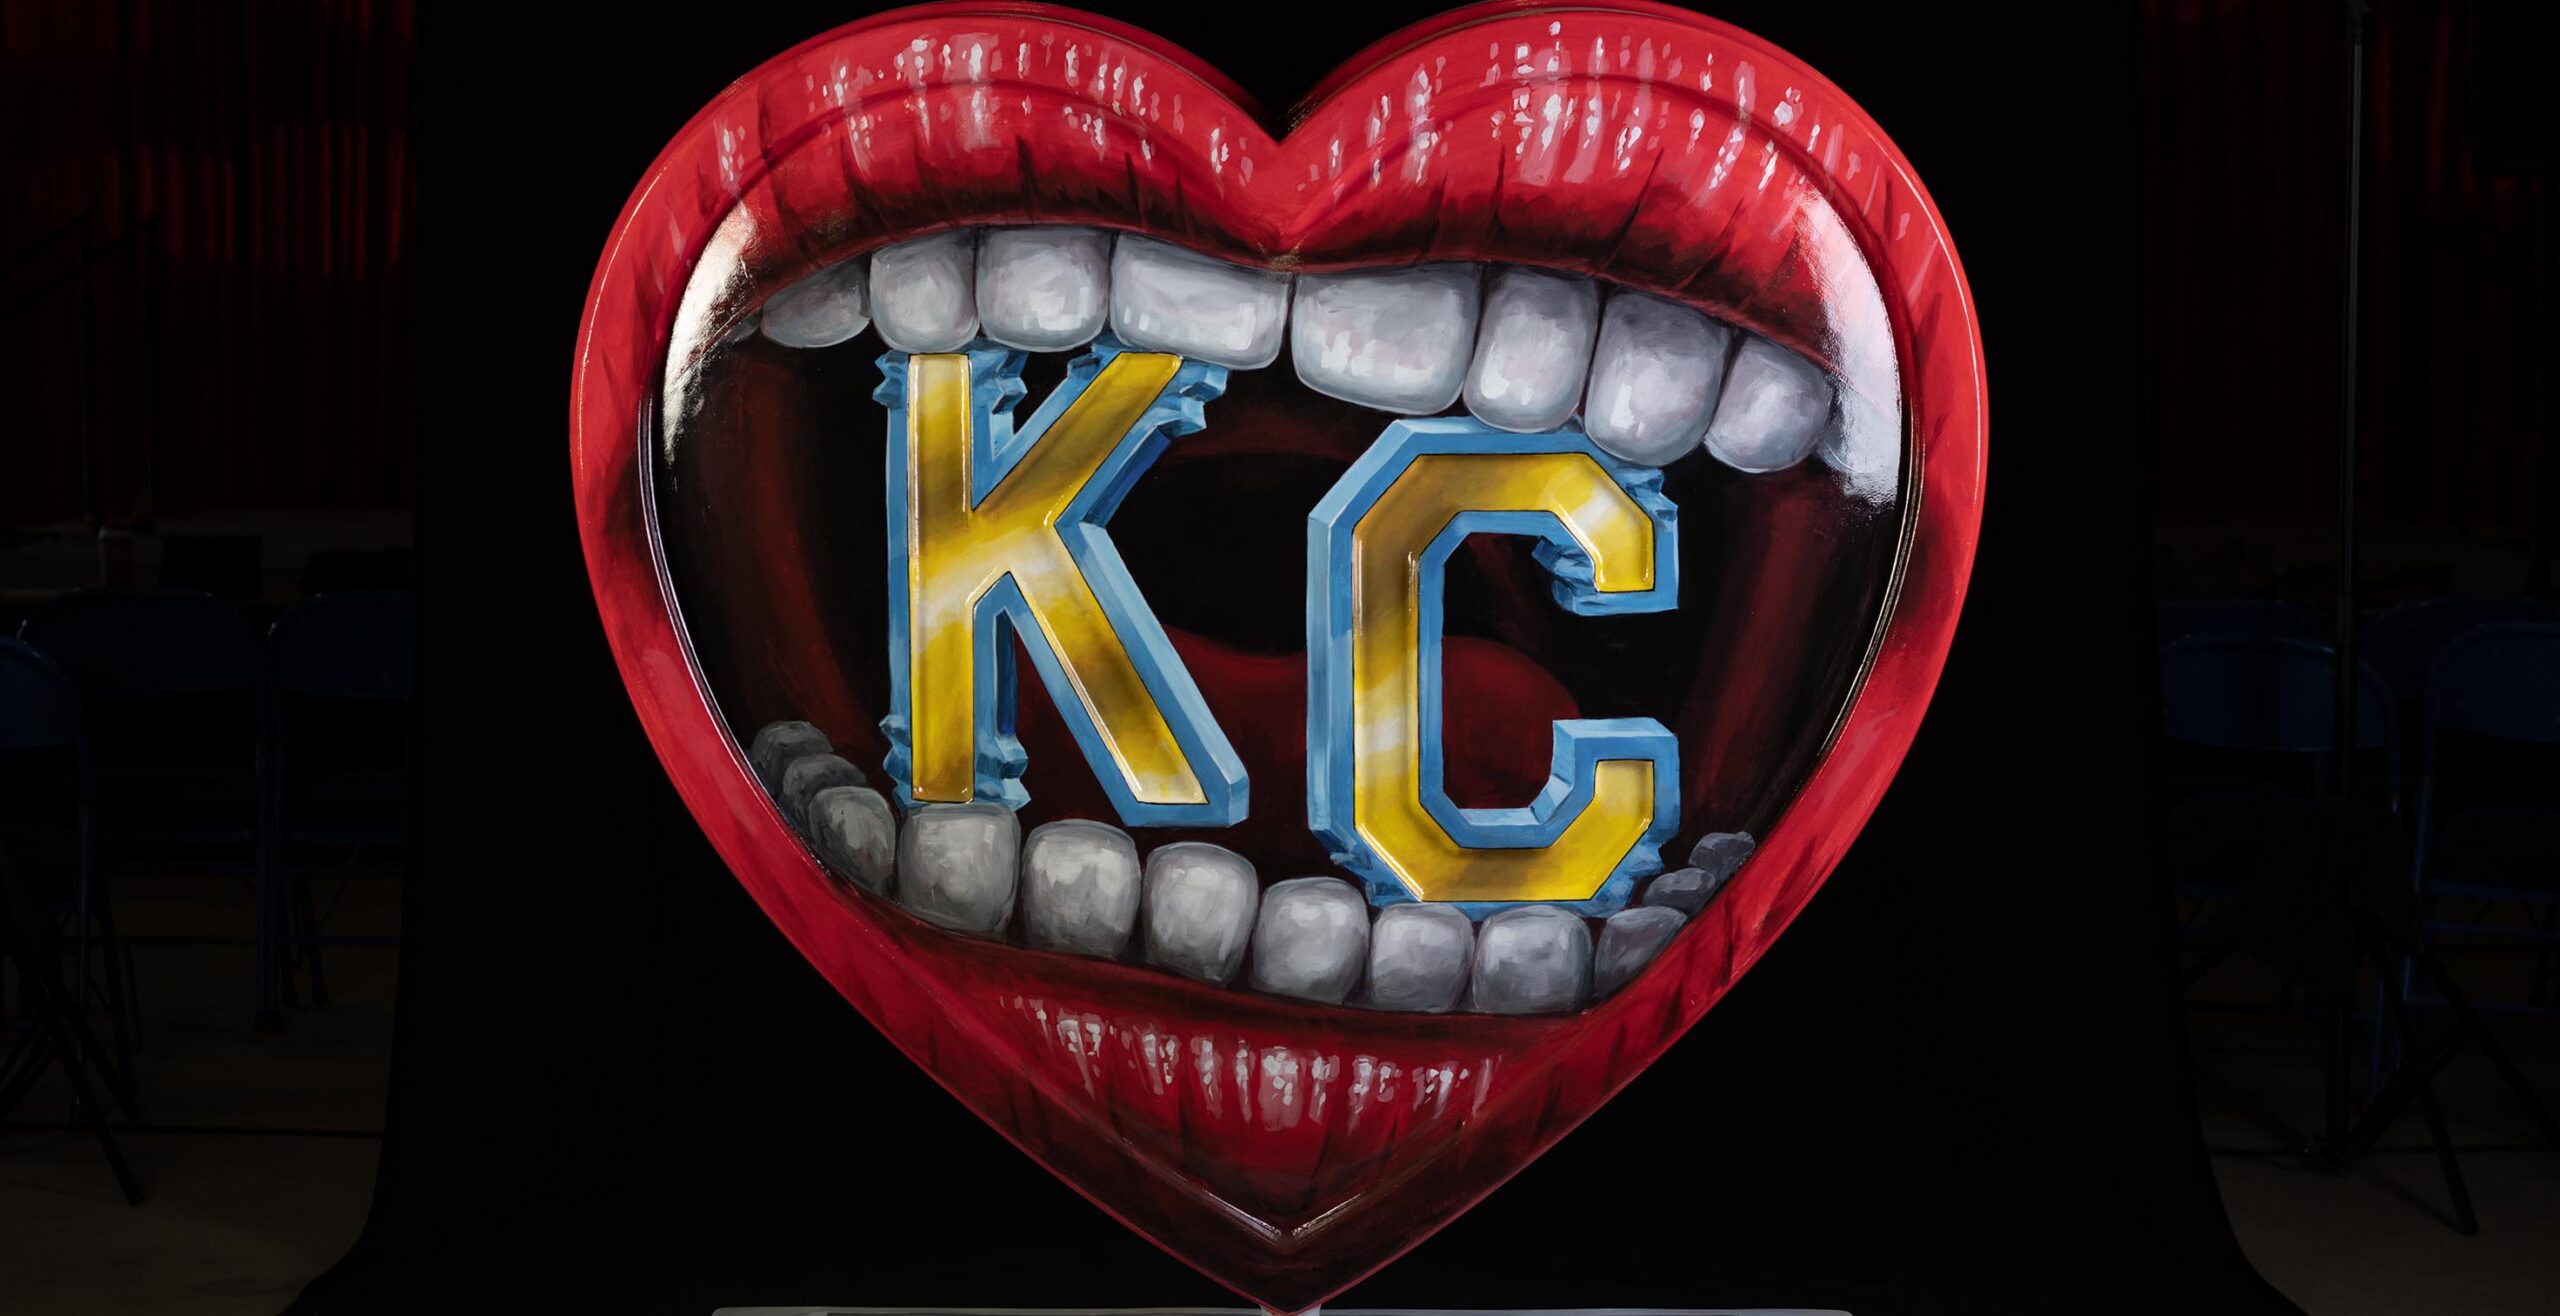 Take a Bite Out of KC/Say What You Love